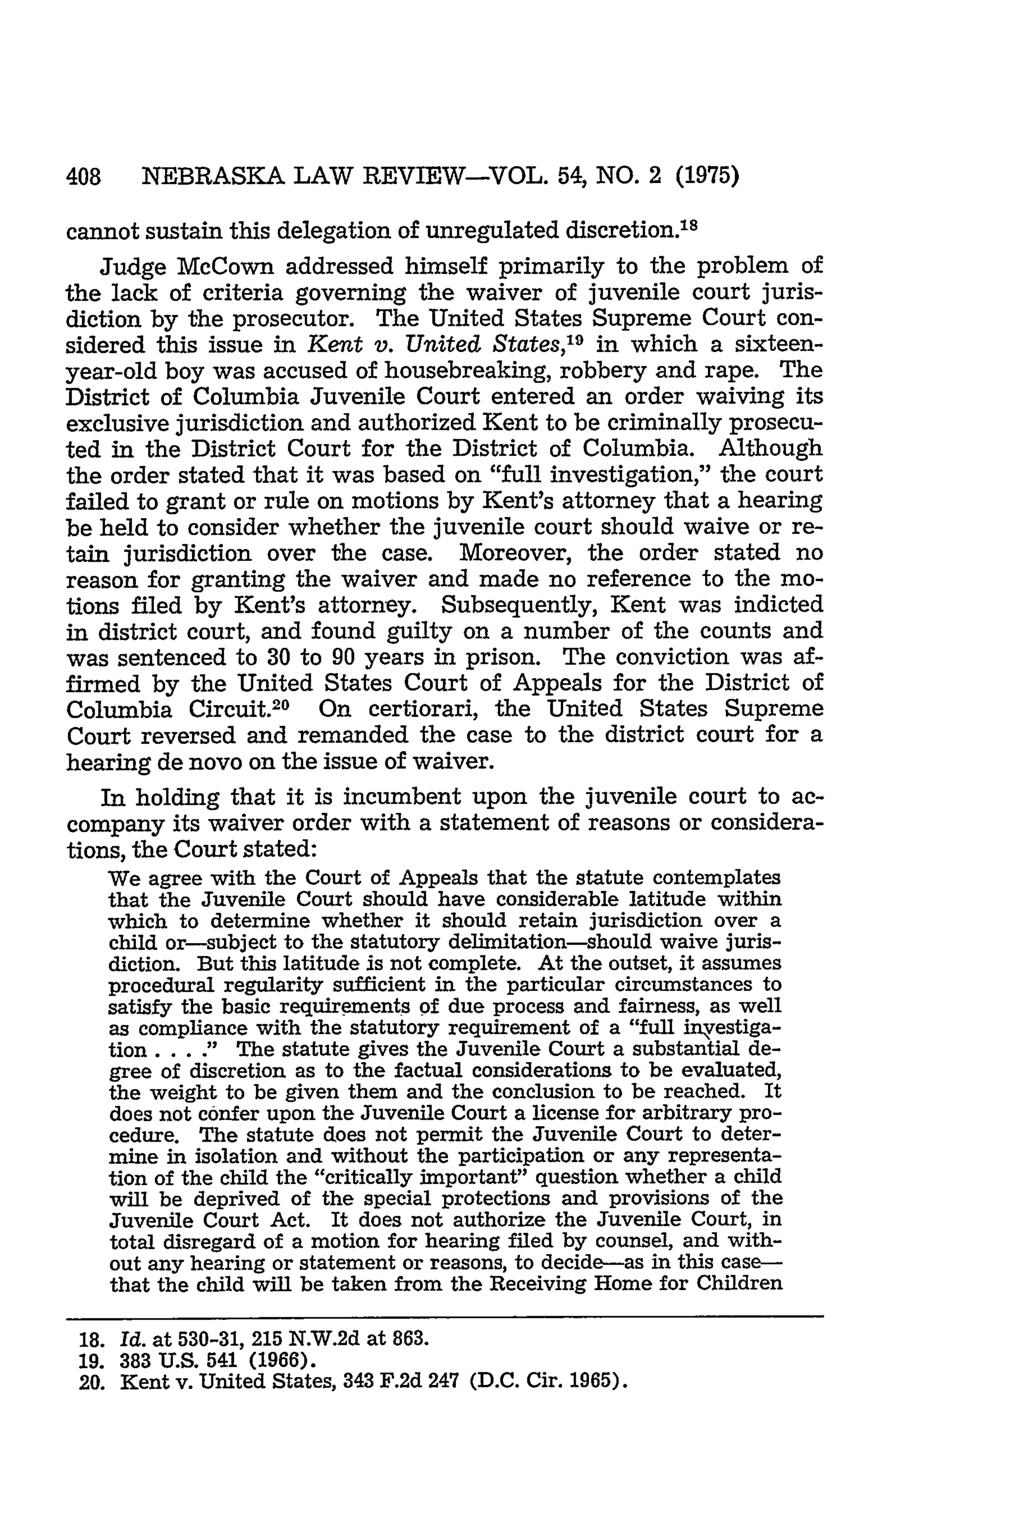 408 NEBRASKA LAW REVIEW-VOL. 54, NO. 2 (1975) cannot sustain this delegation of unregulated discretion.